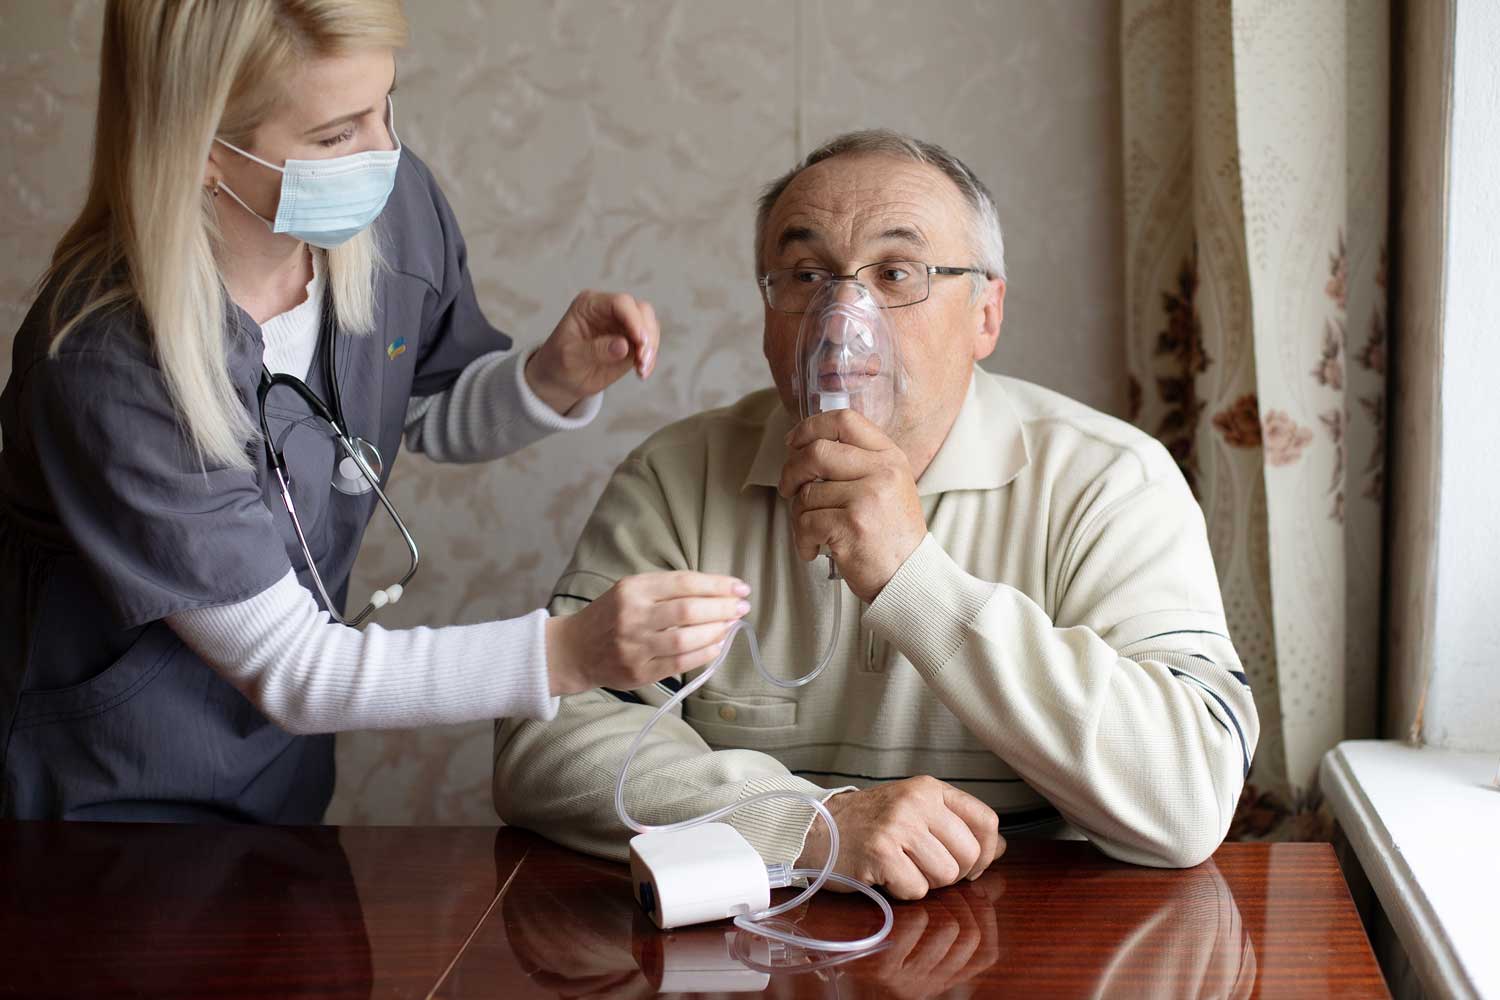 Nurse helping a patient with a nebulizer during respiratory care